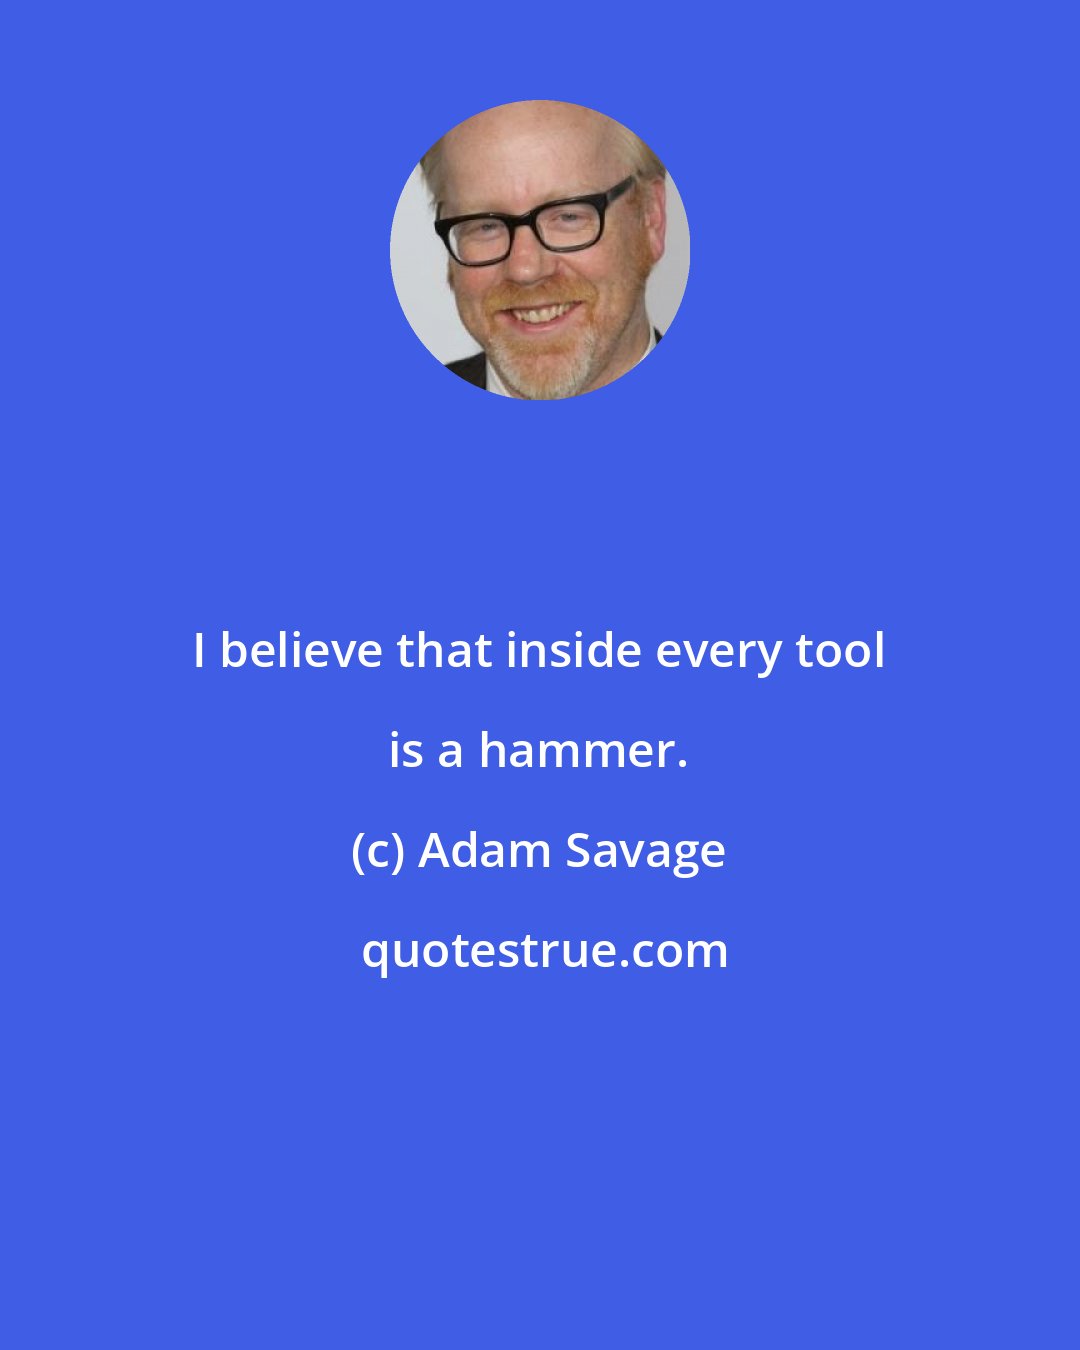 Adam Savage: I believe that inside every tool is a hammer.